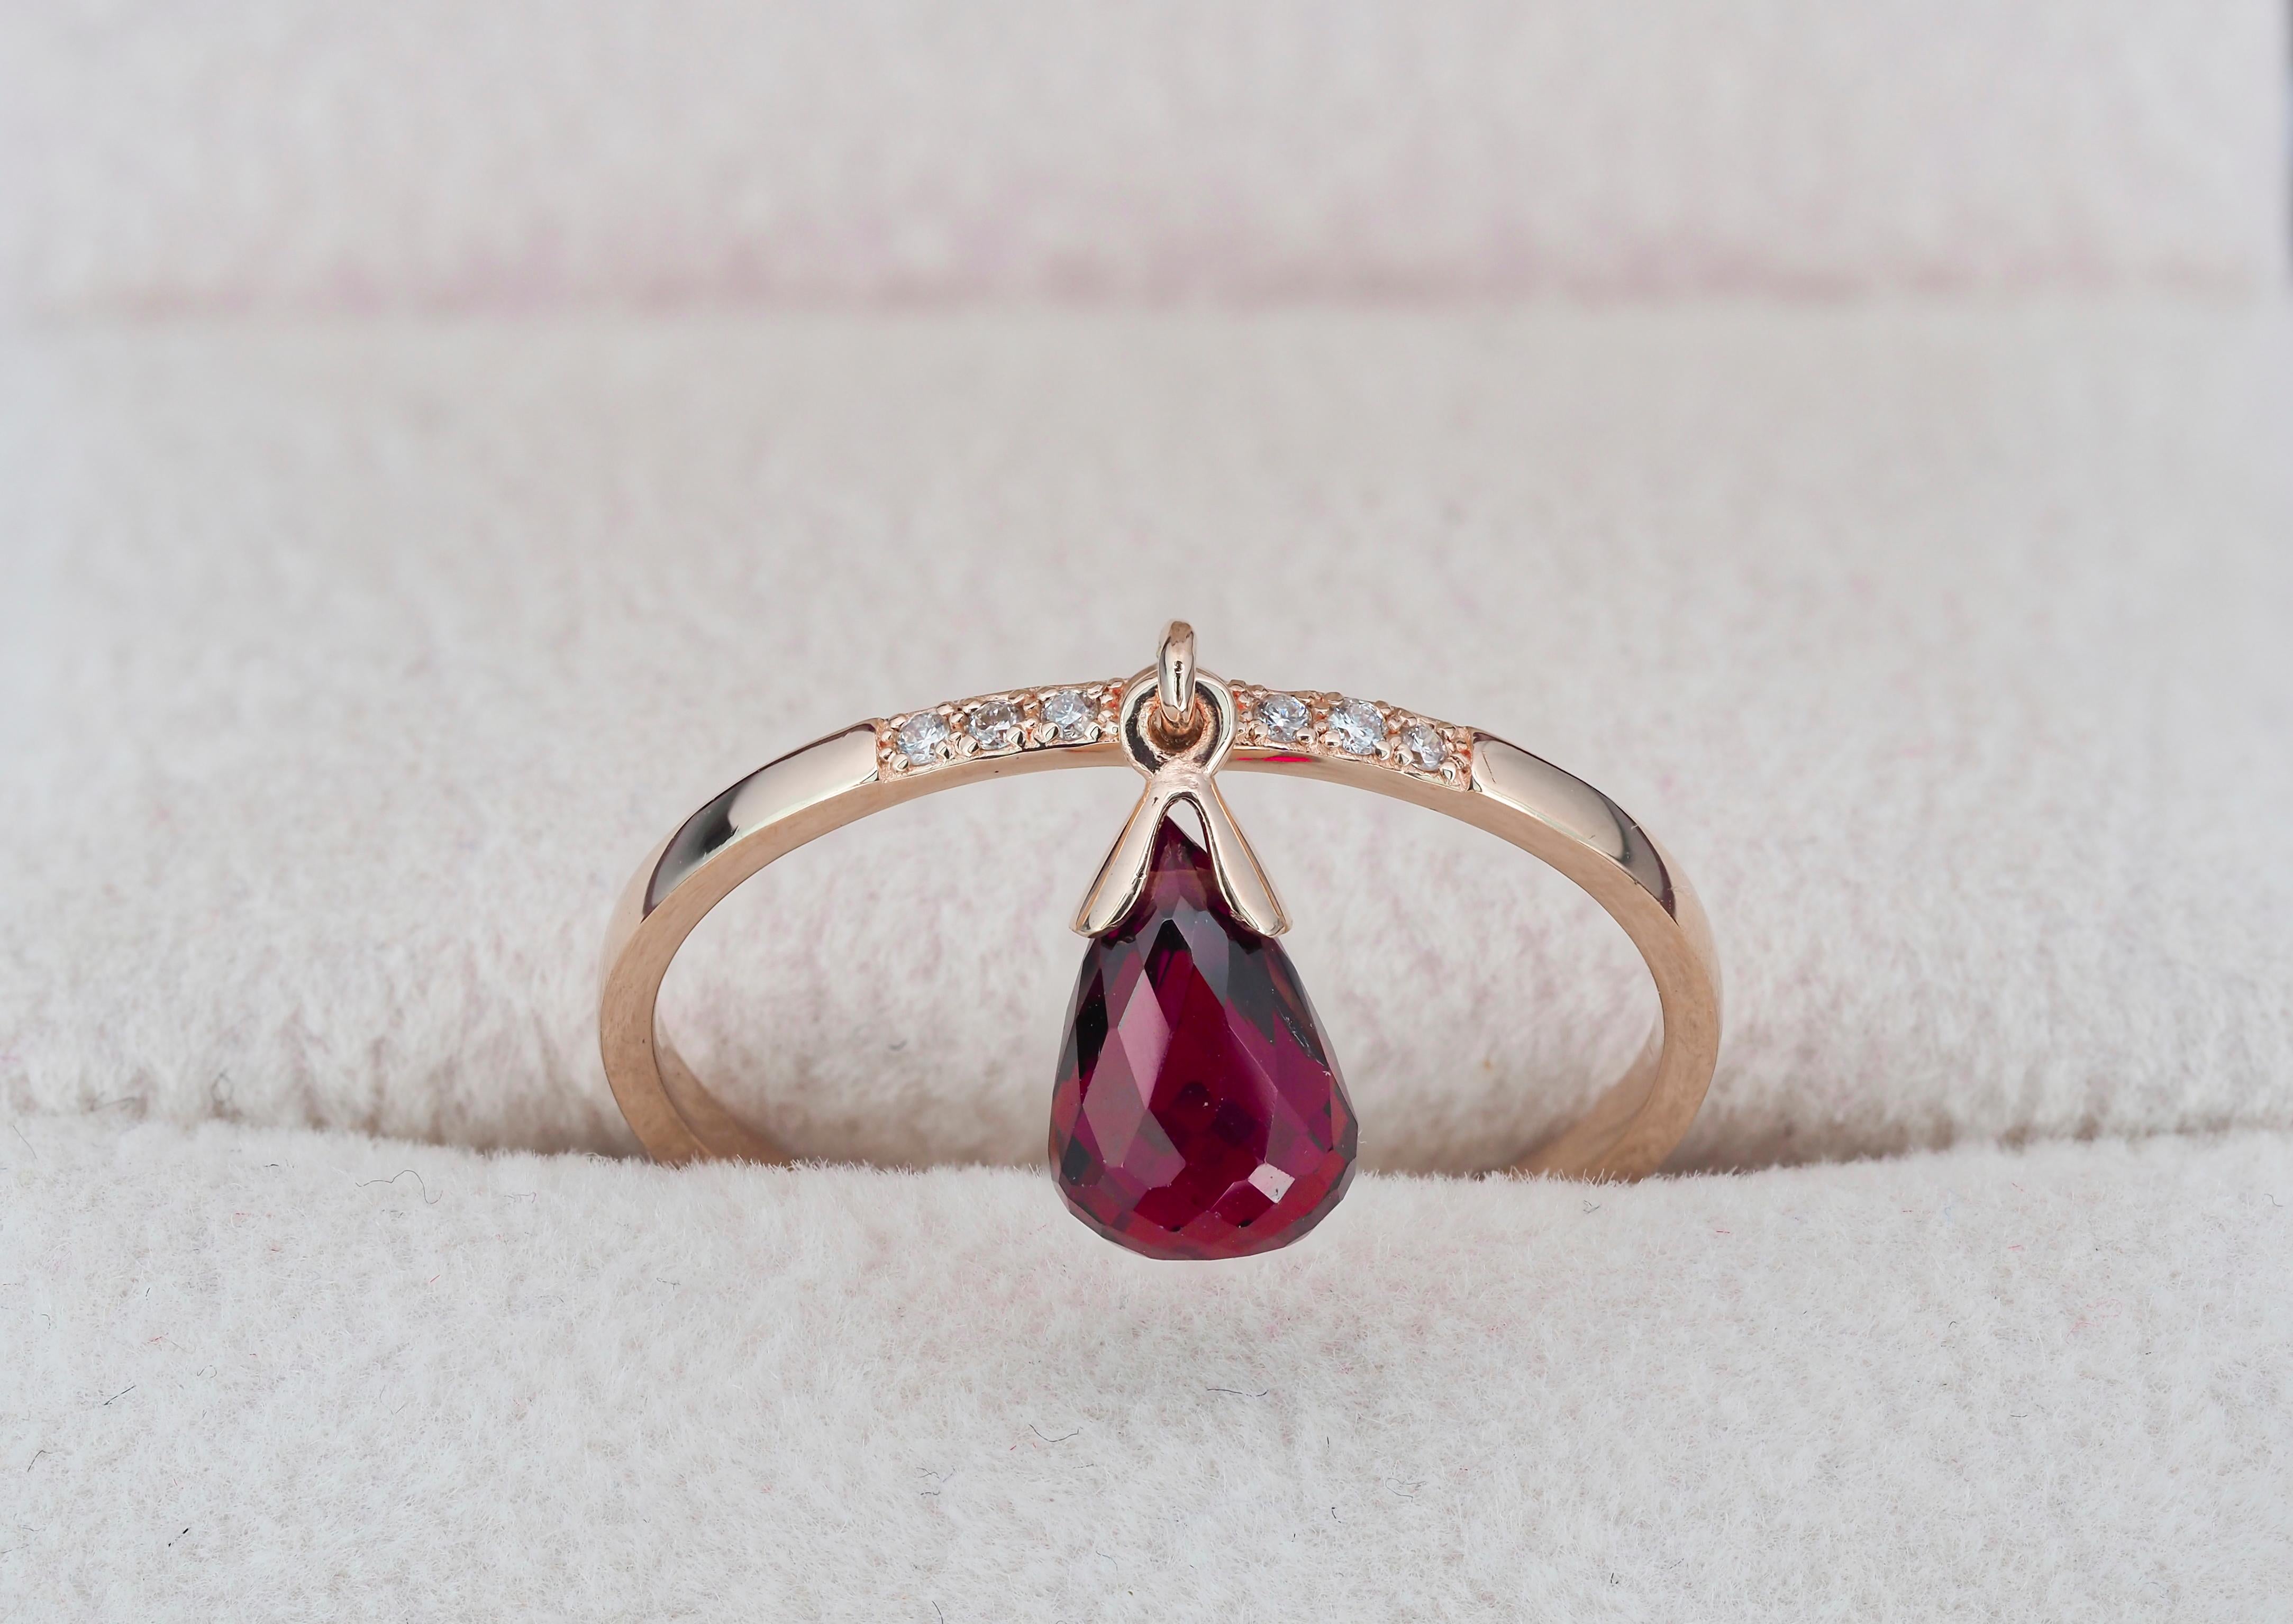 For Sale:  14k Gold Ring with Briolette Cut Garnet and Diamonds 6